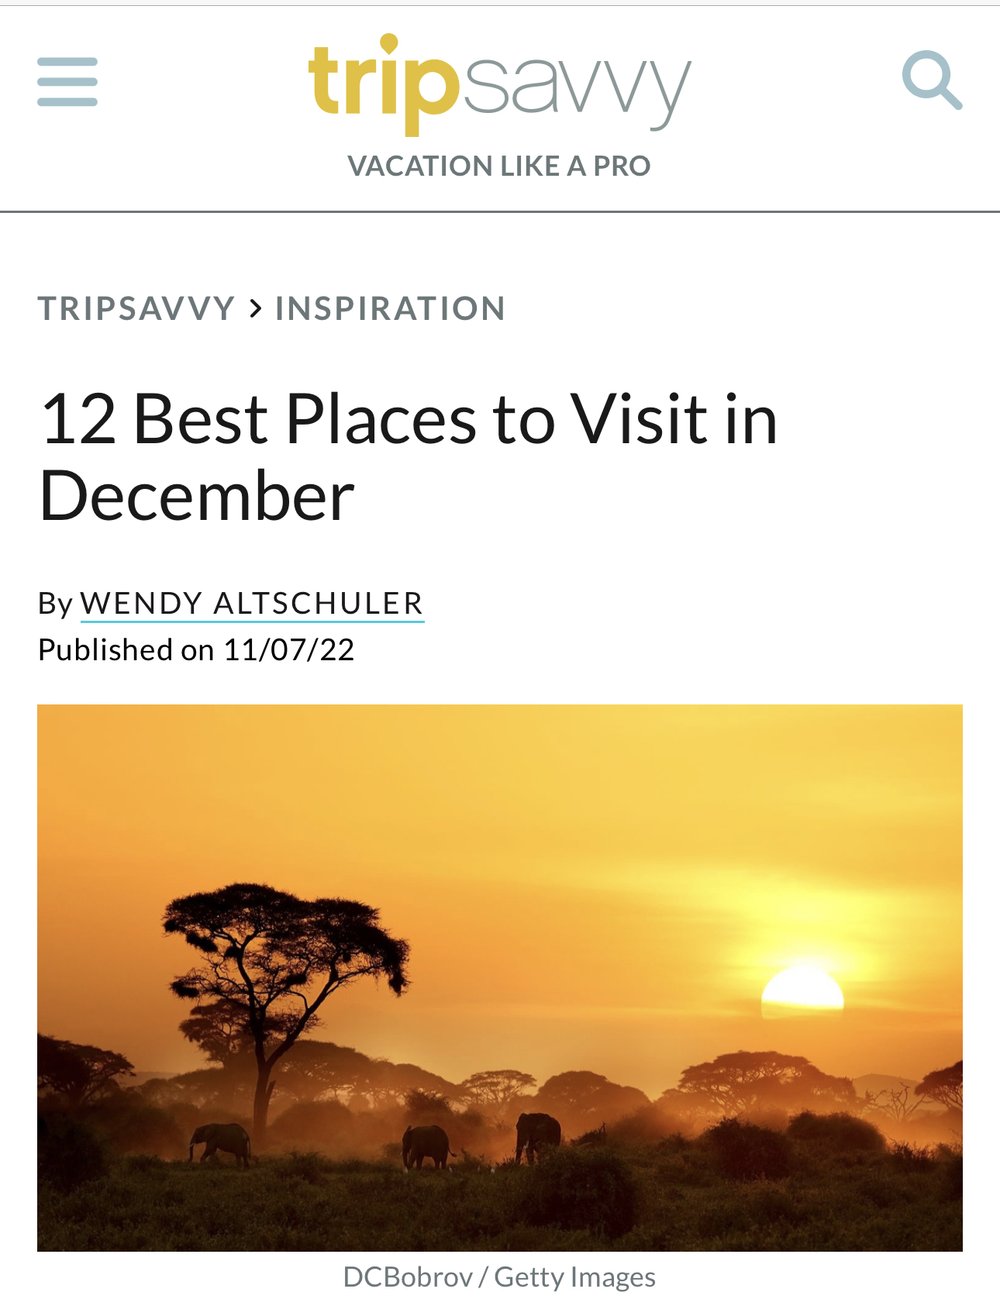 12 Best Places to Visit in December